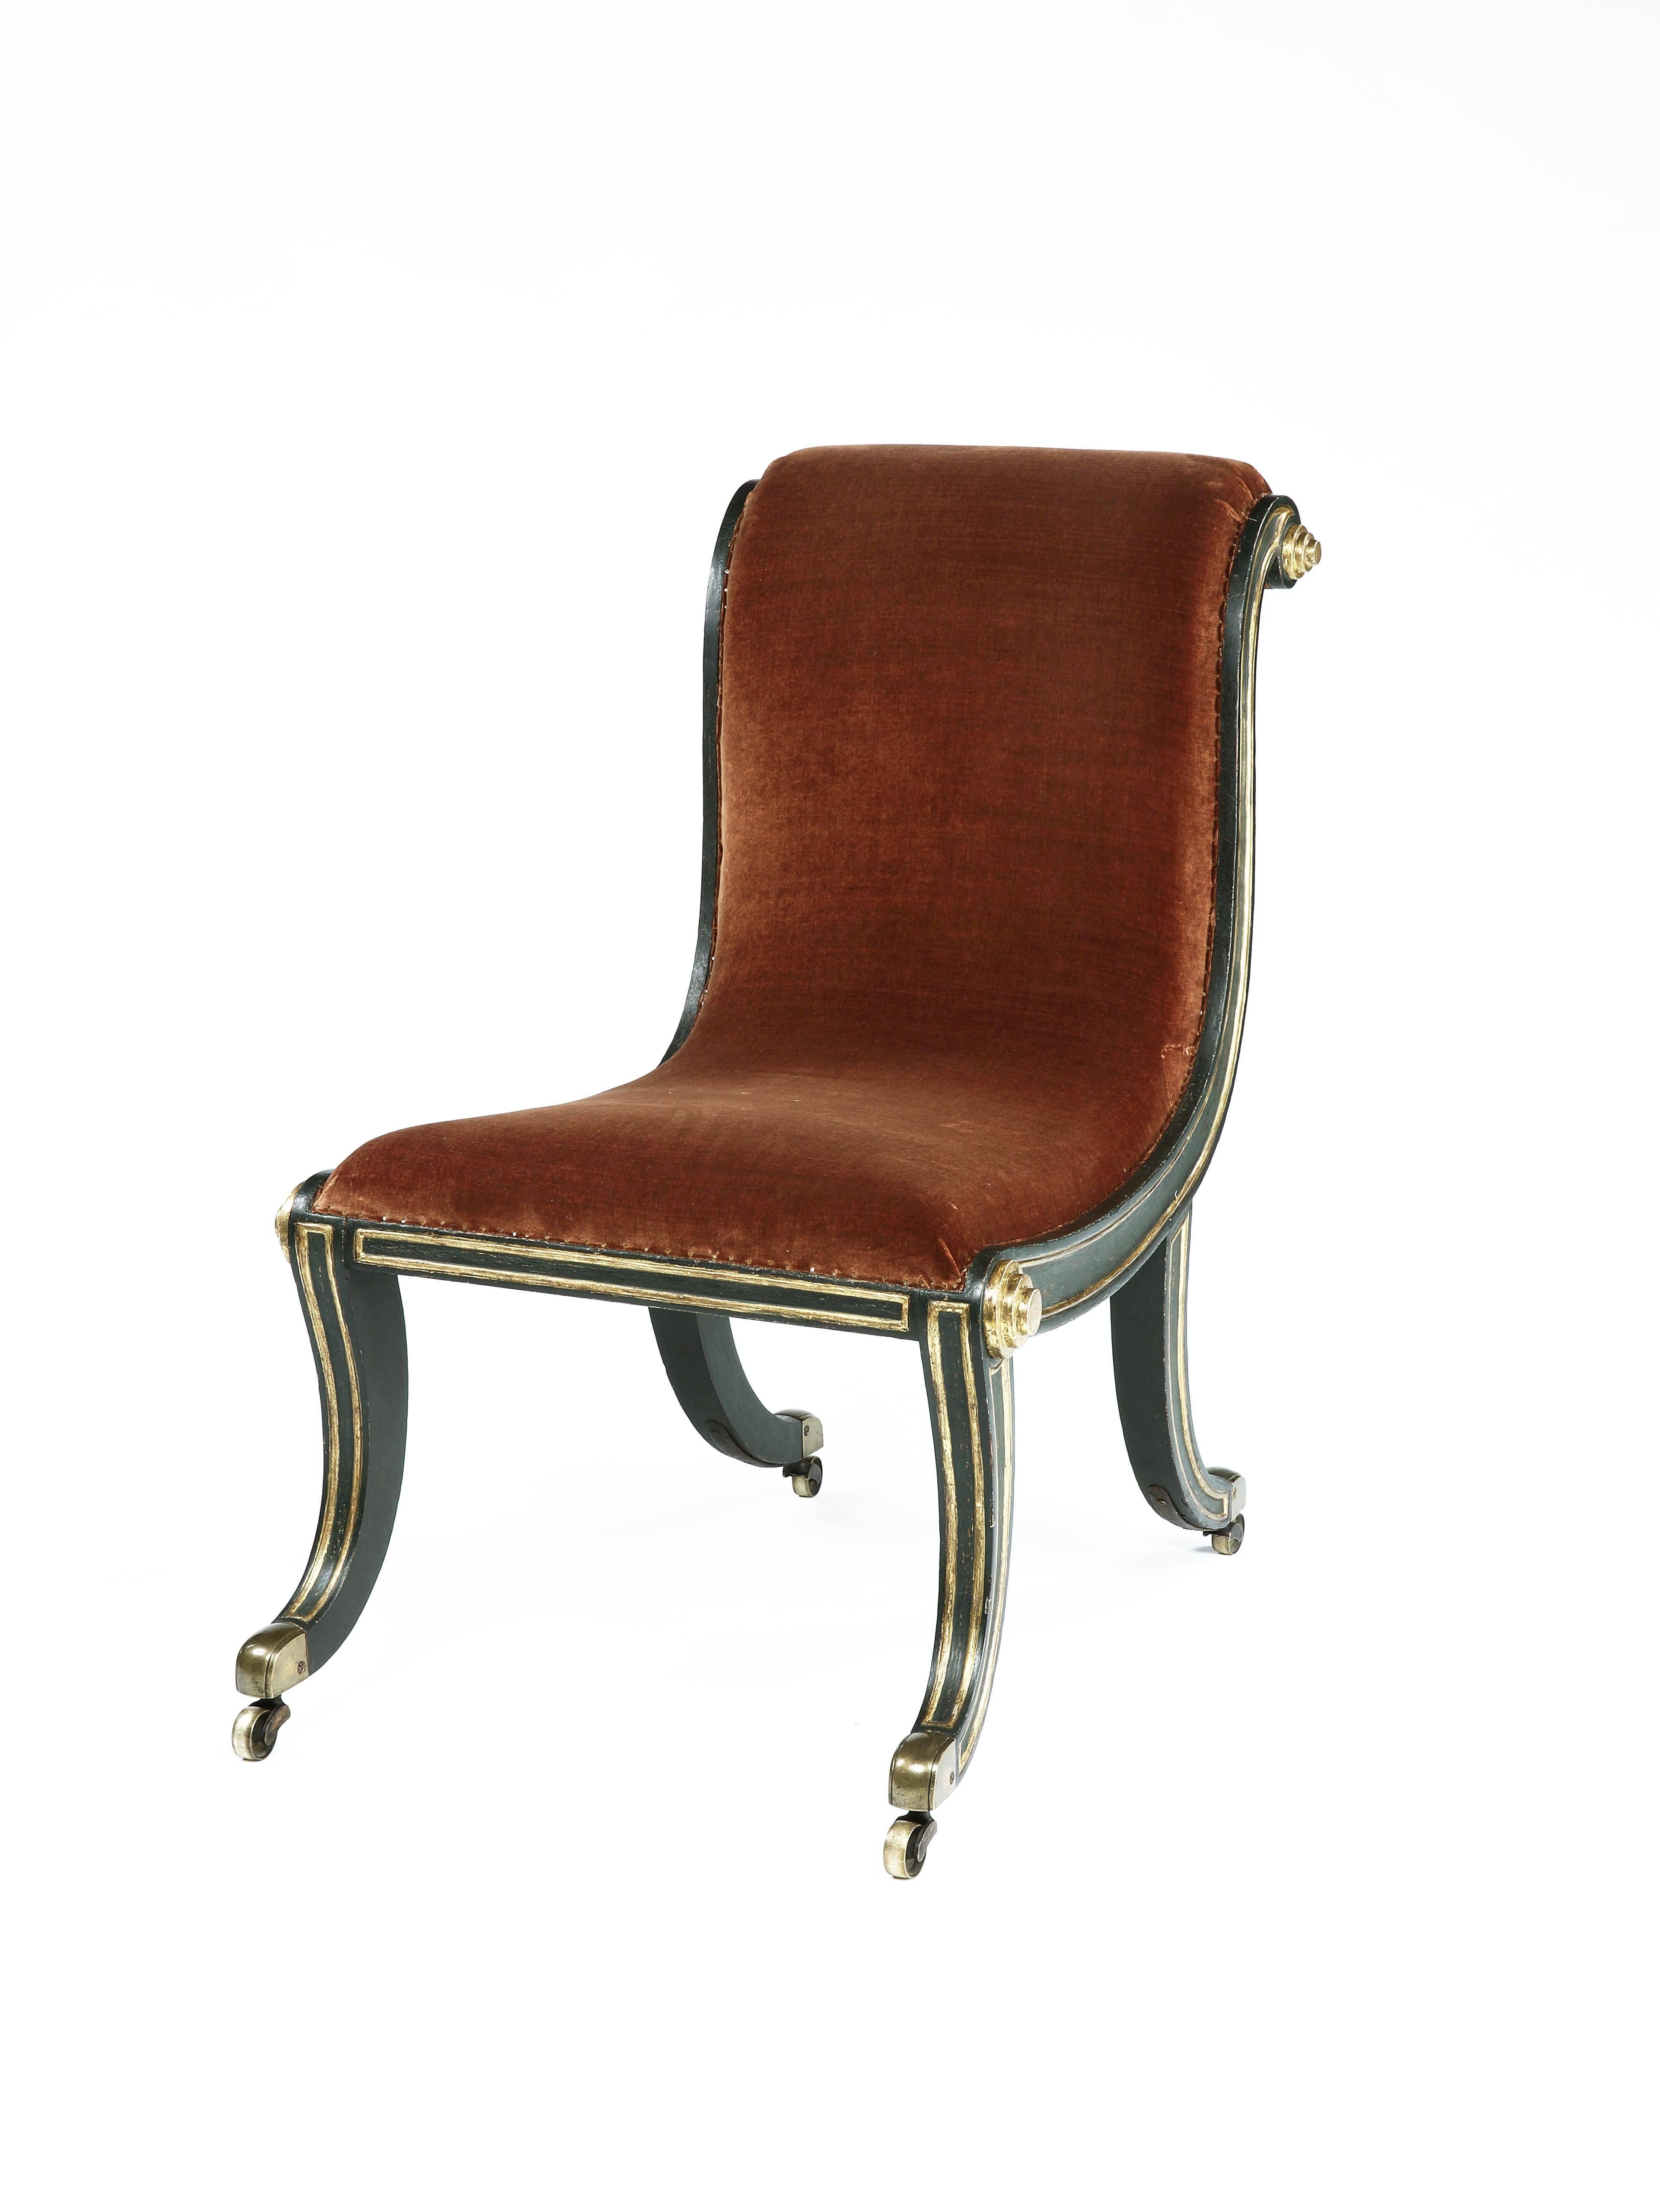 Carved giltwood and faux bronze painted frame of elegant curvaceous and scrolling form, on sabre front legs and exaggerated swept back rear legs with casters, traditionally upholstered with hand-stitched horsehair and covered with